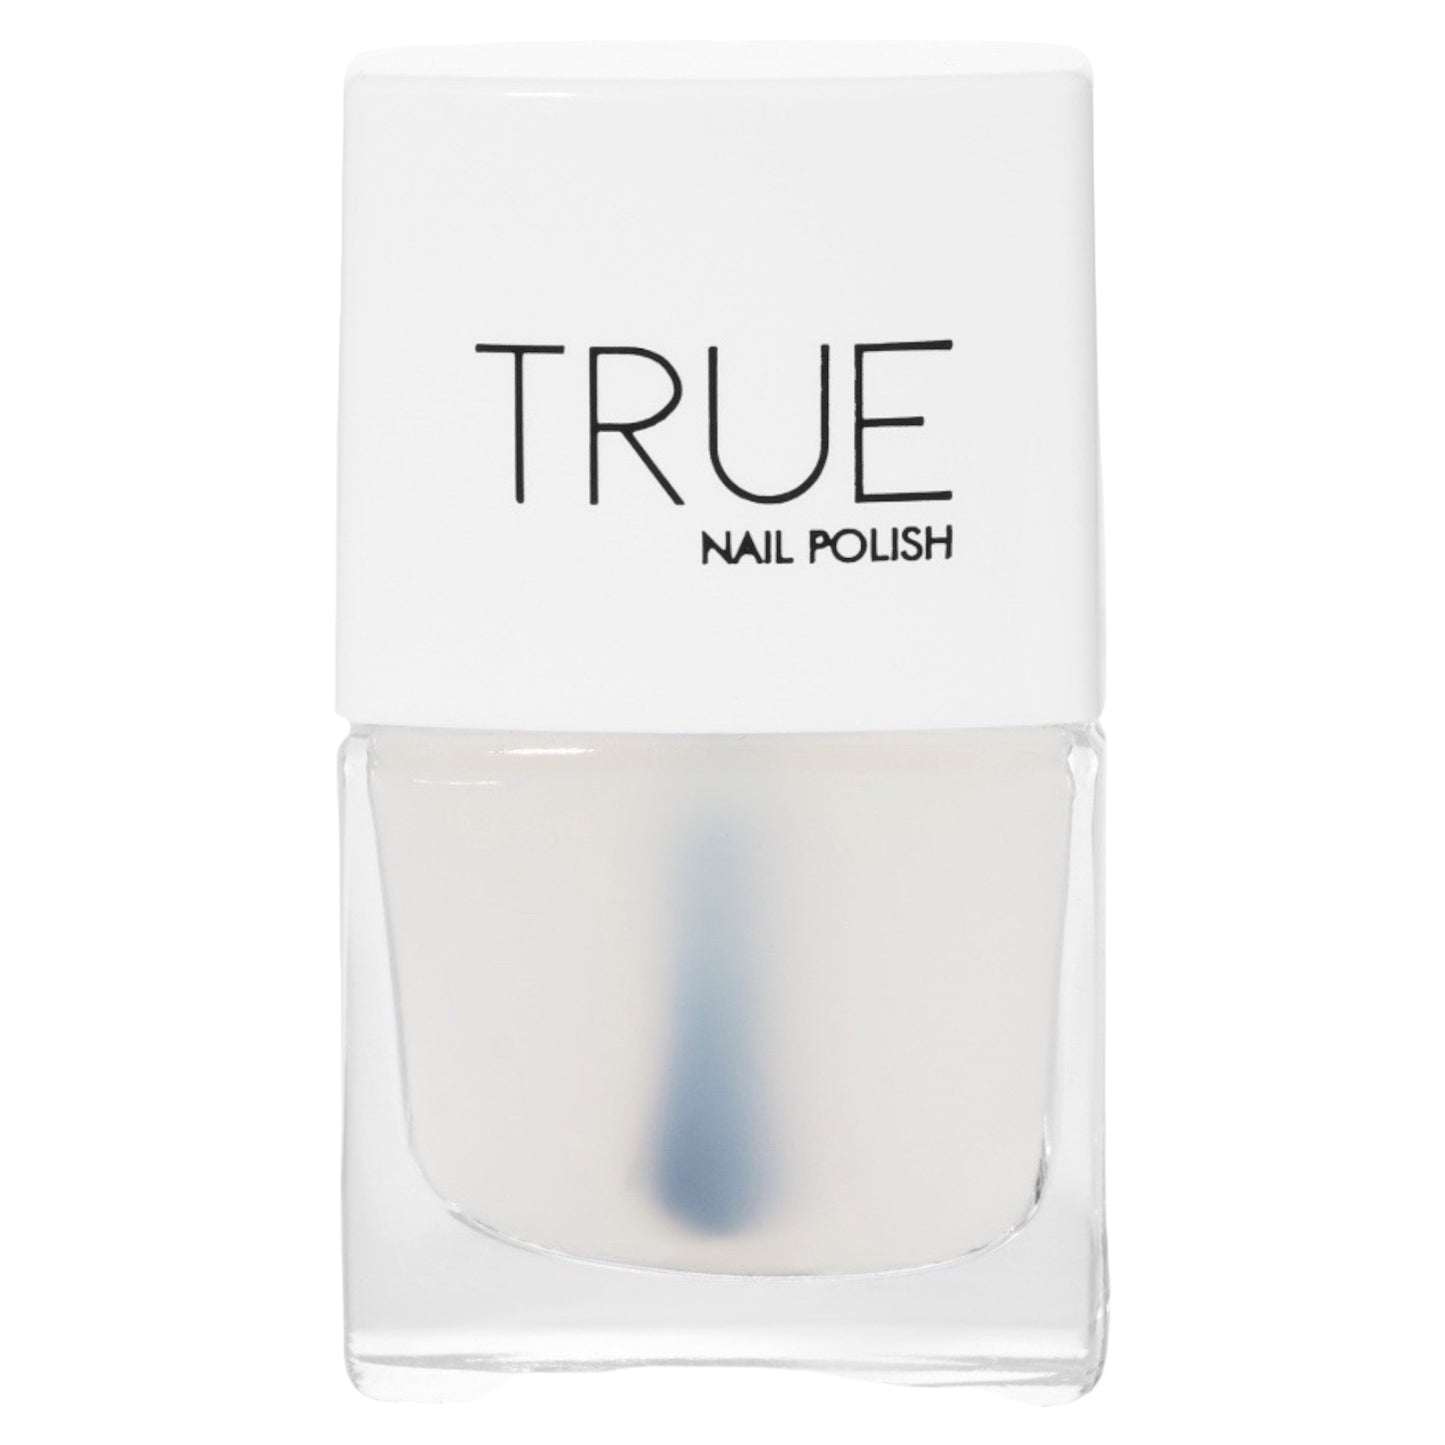 A bottle of High Gloss Top Coat, a clear shade from True Nail Polish that provides a matte finish 